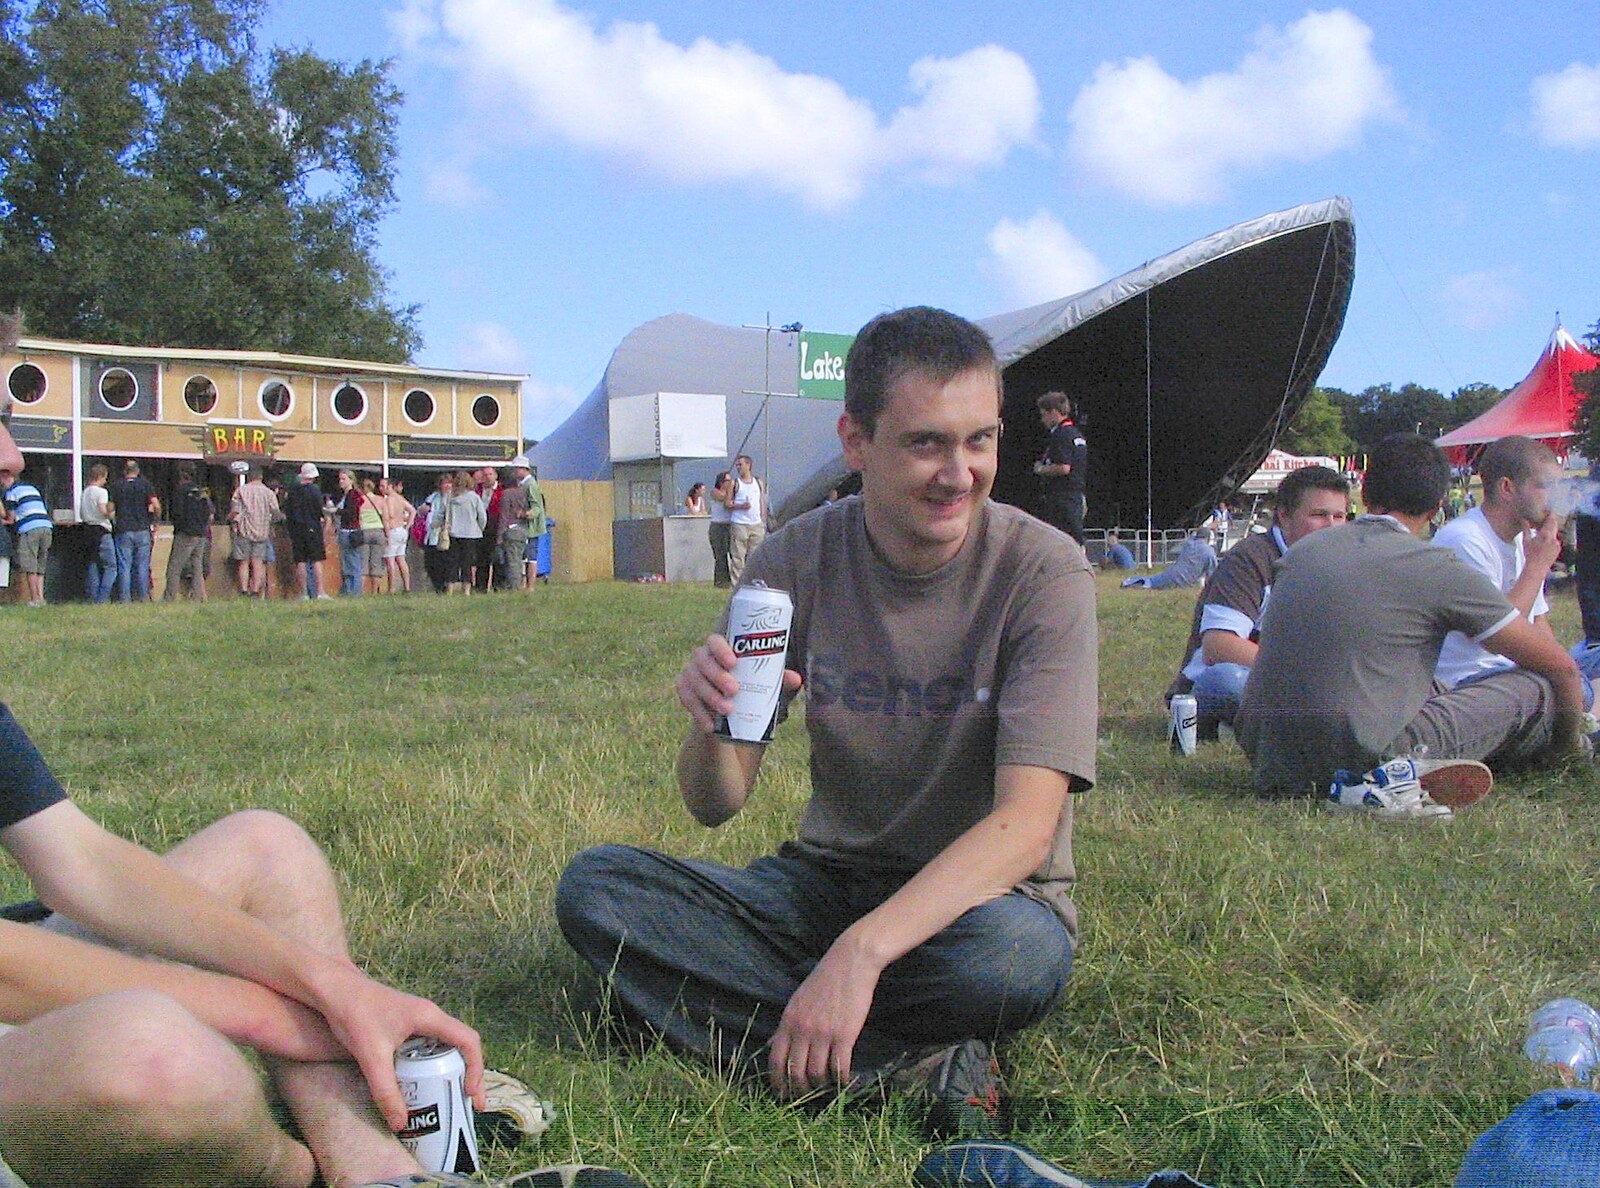 Andrew on Carling from The First Latitude Festival, Henham Park, Suffolk - 14th July 2006